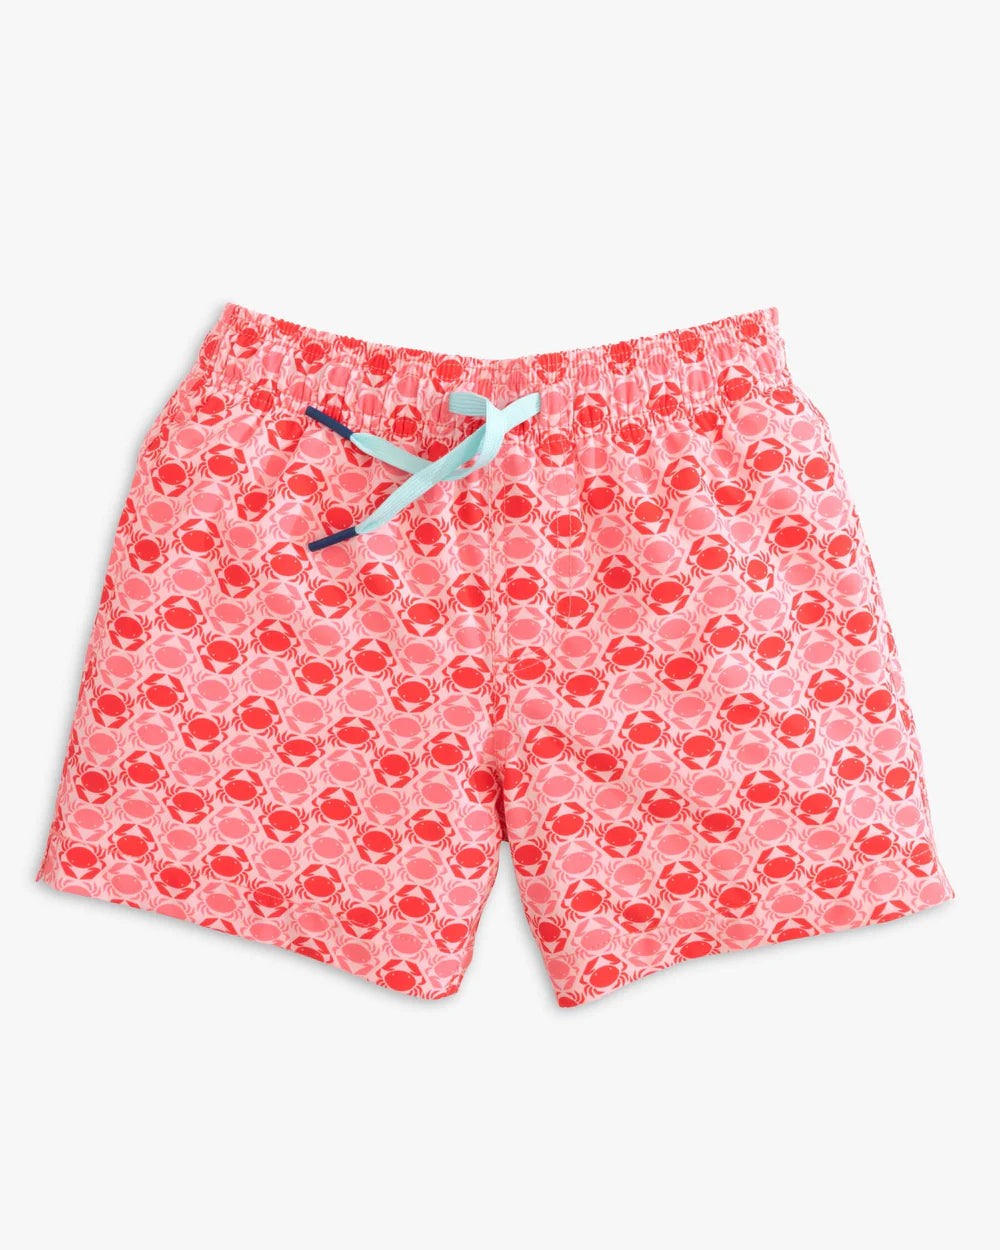 Southern Tide Youth Why So Crabby Printed Swim Trunk